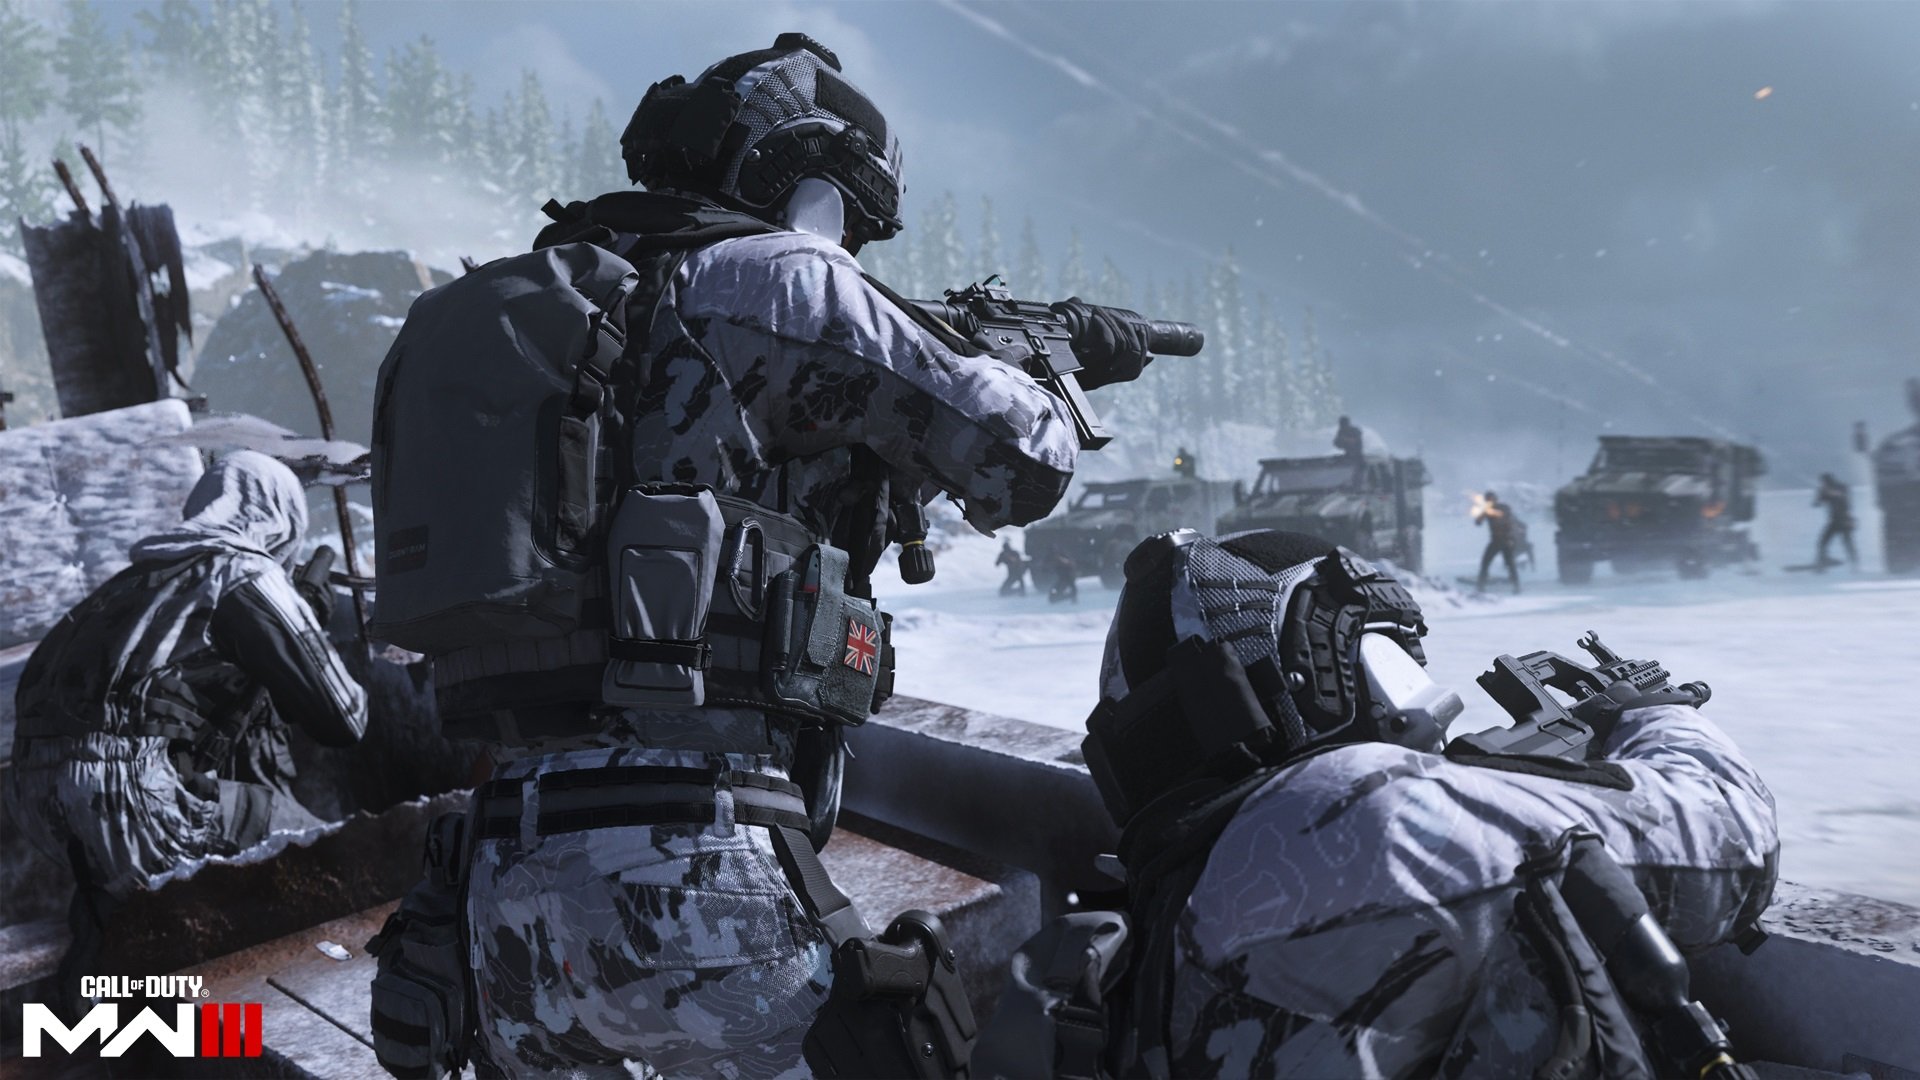 Modern Warfare 3's Metacritic score is a new low for the Call of Duty